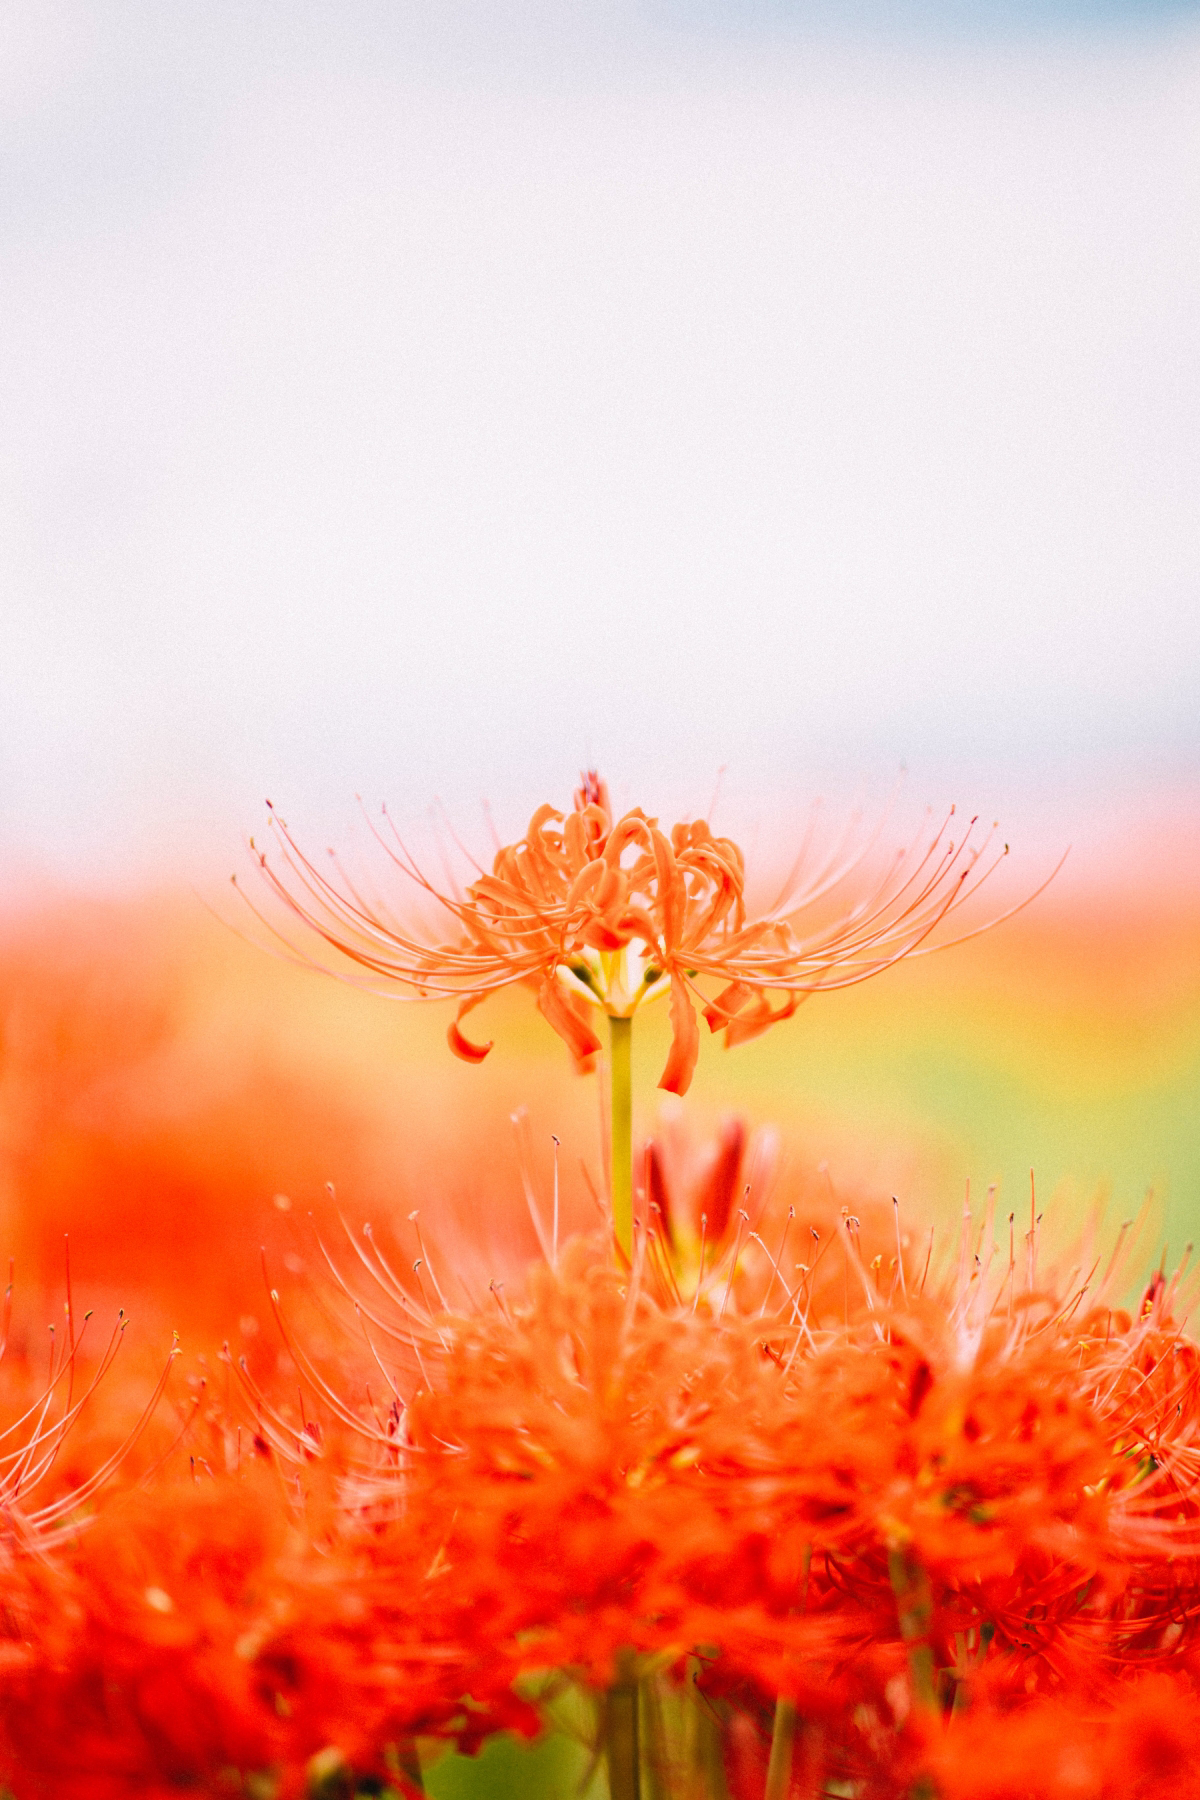 what do red spider lilies symbolize